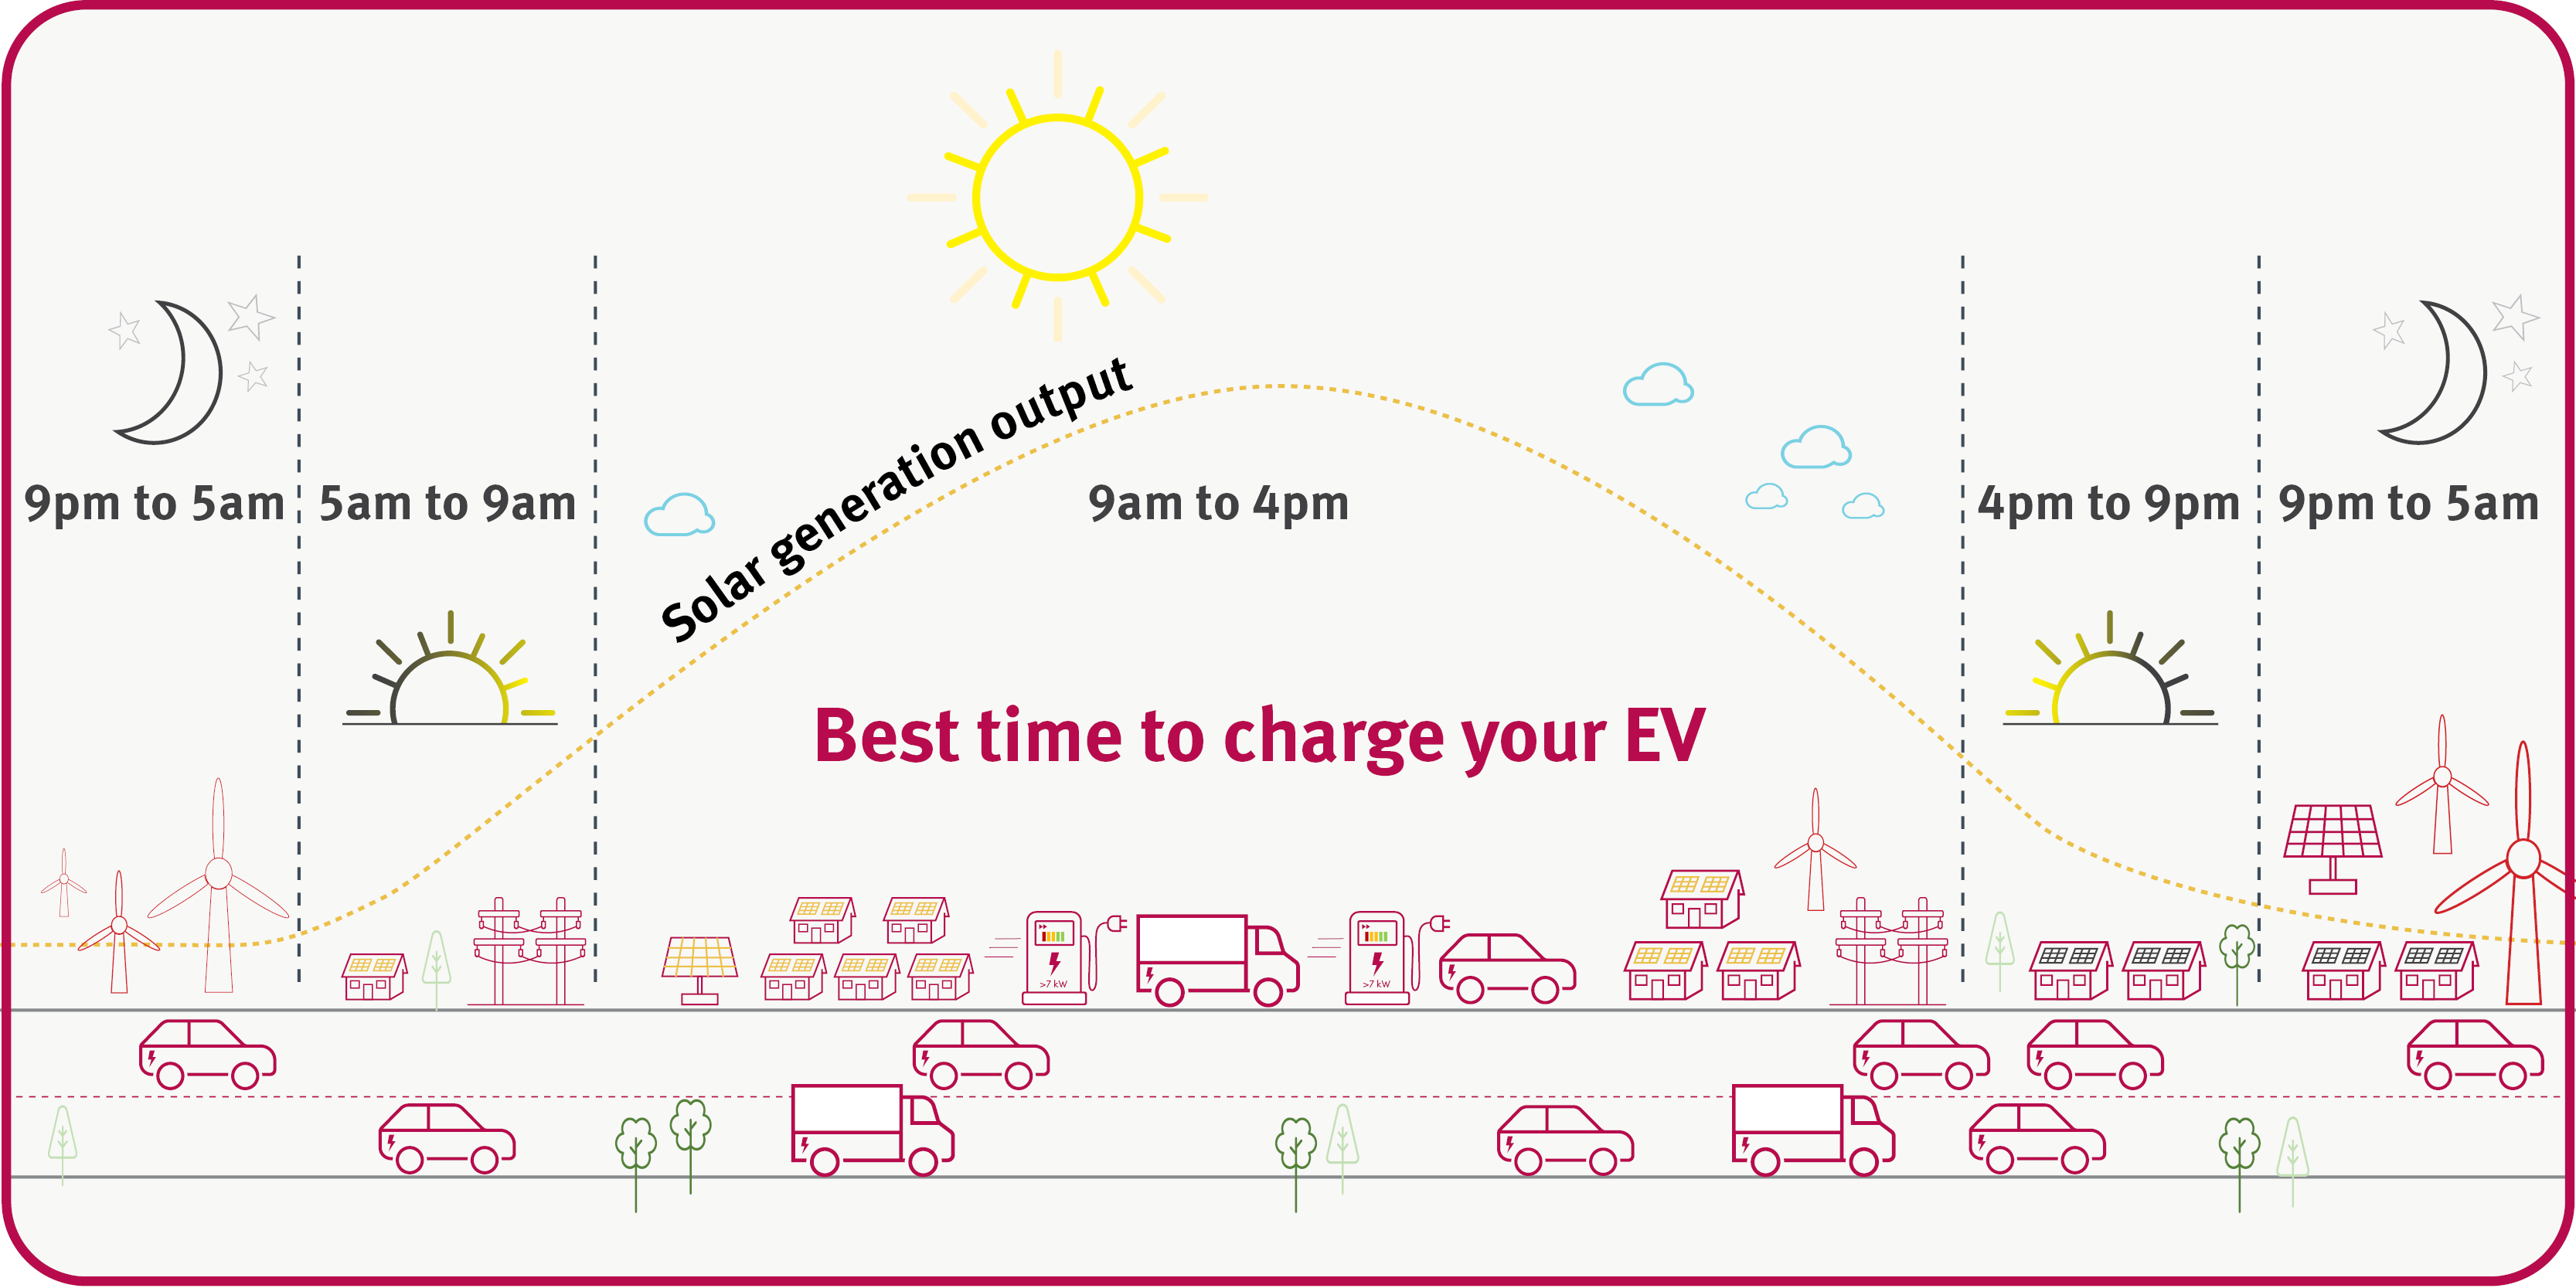 Best time to charge your EV